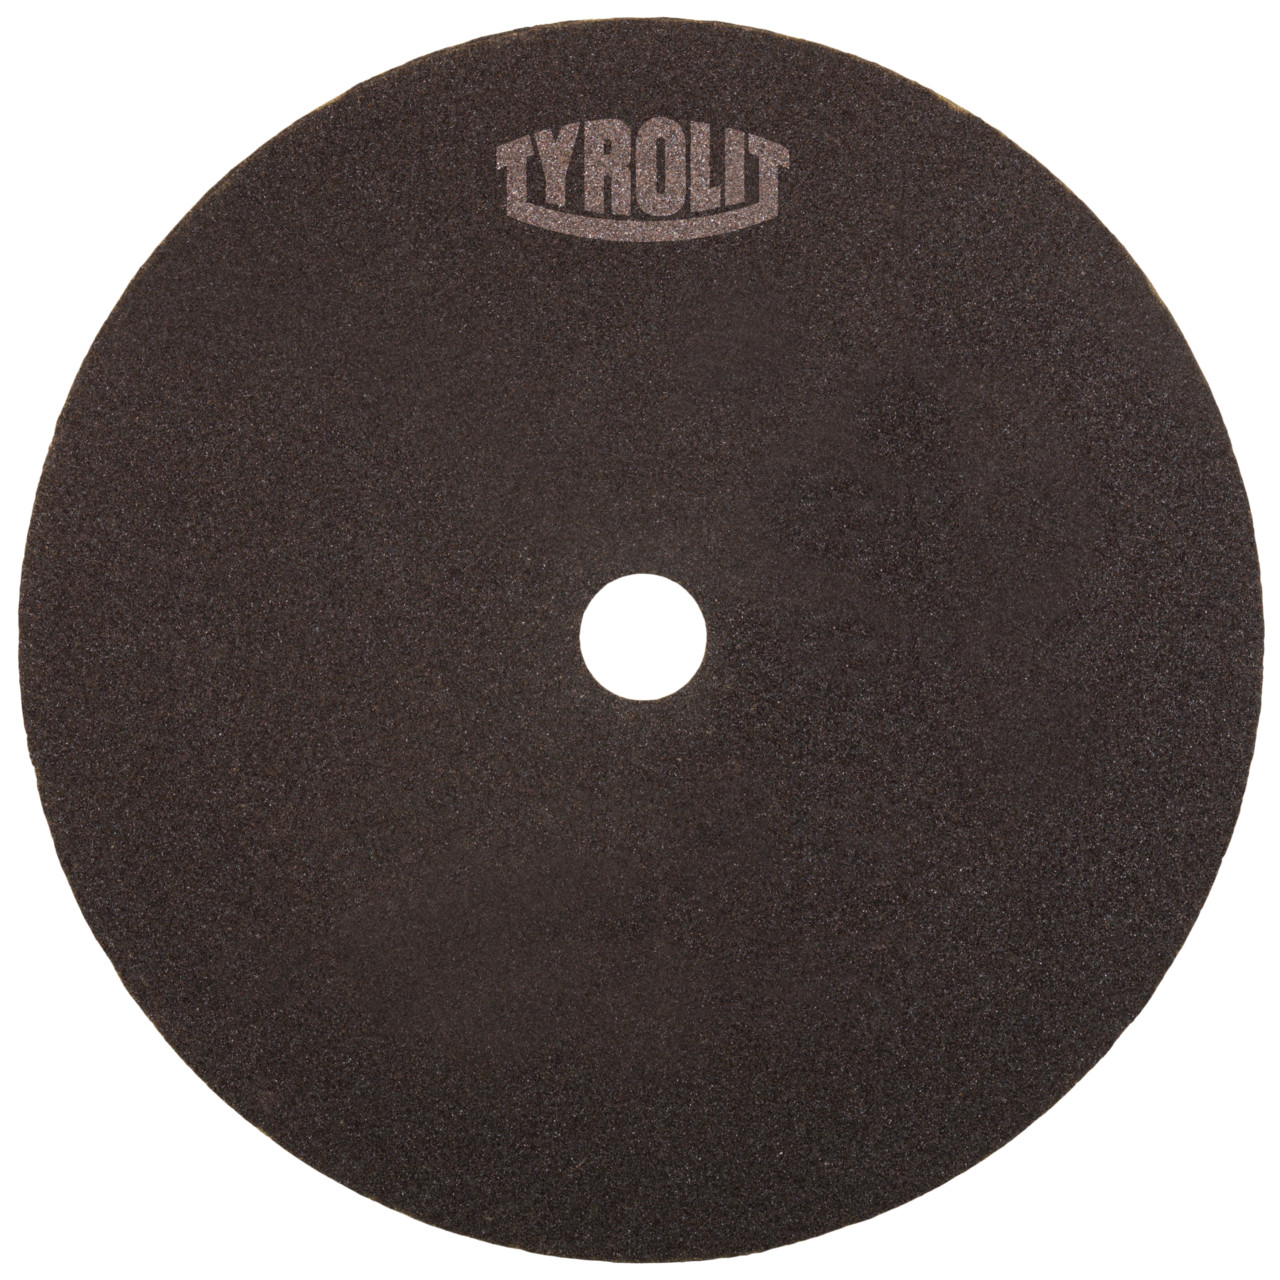 Tyrolit Cutting disc for cutting and saw sharpening DxDxH 150x1.5x32 For steel and HSS, shape: 41N - straight version (non-woven cutting disc), Art. 662430